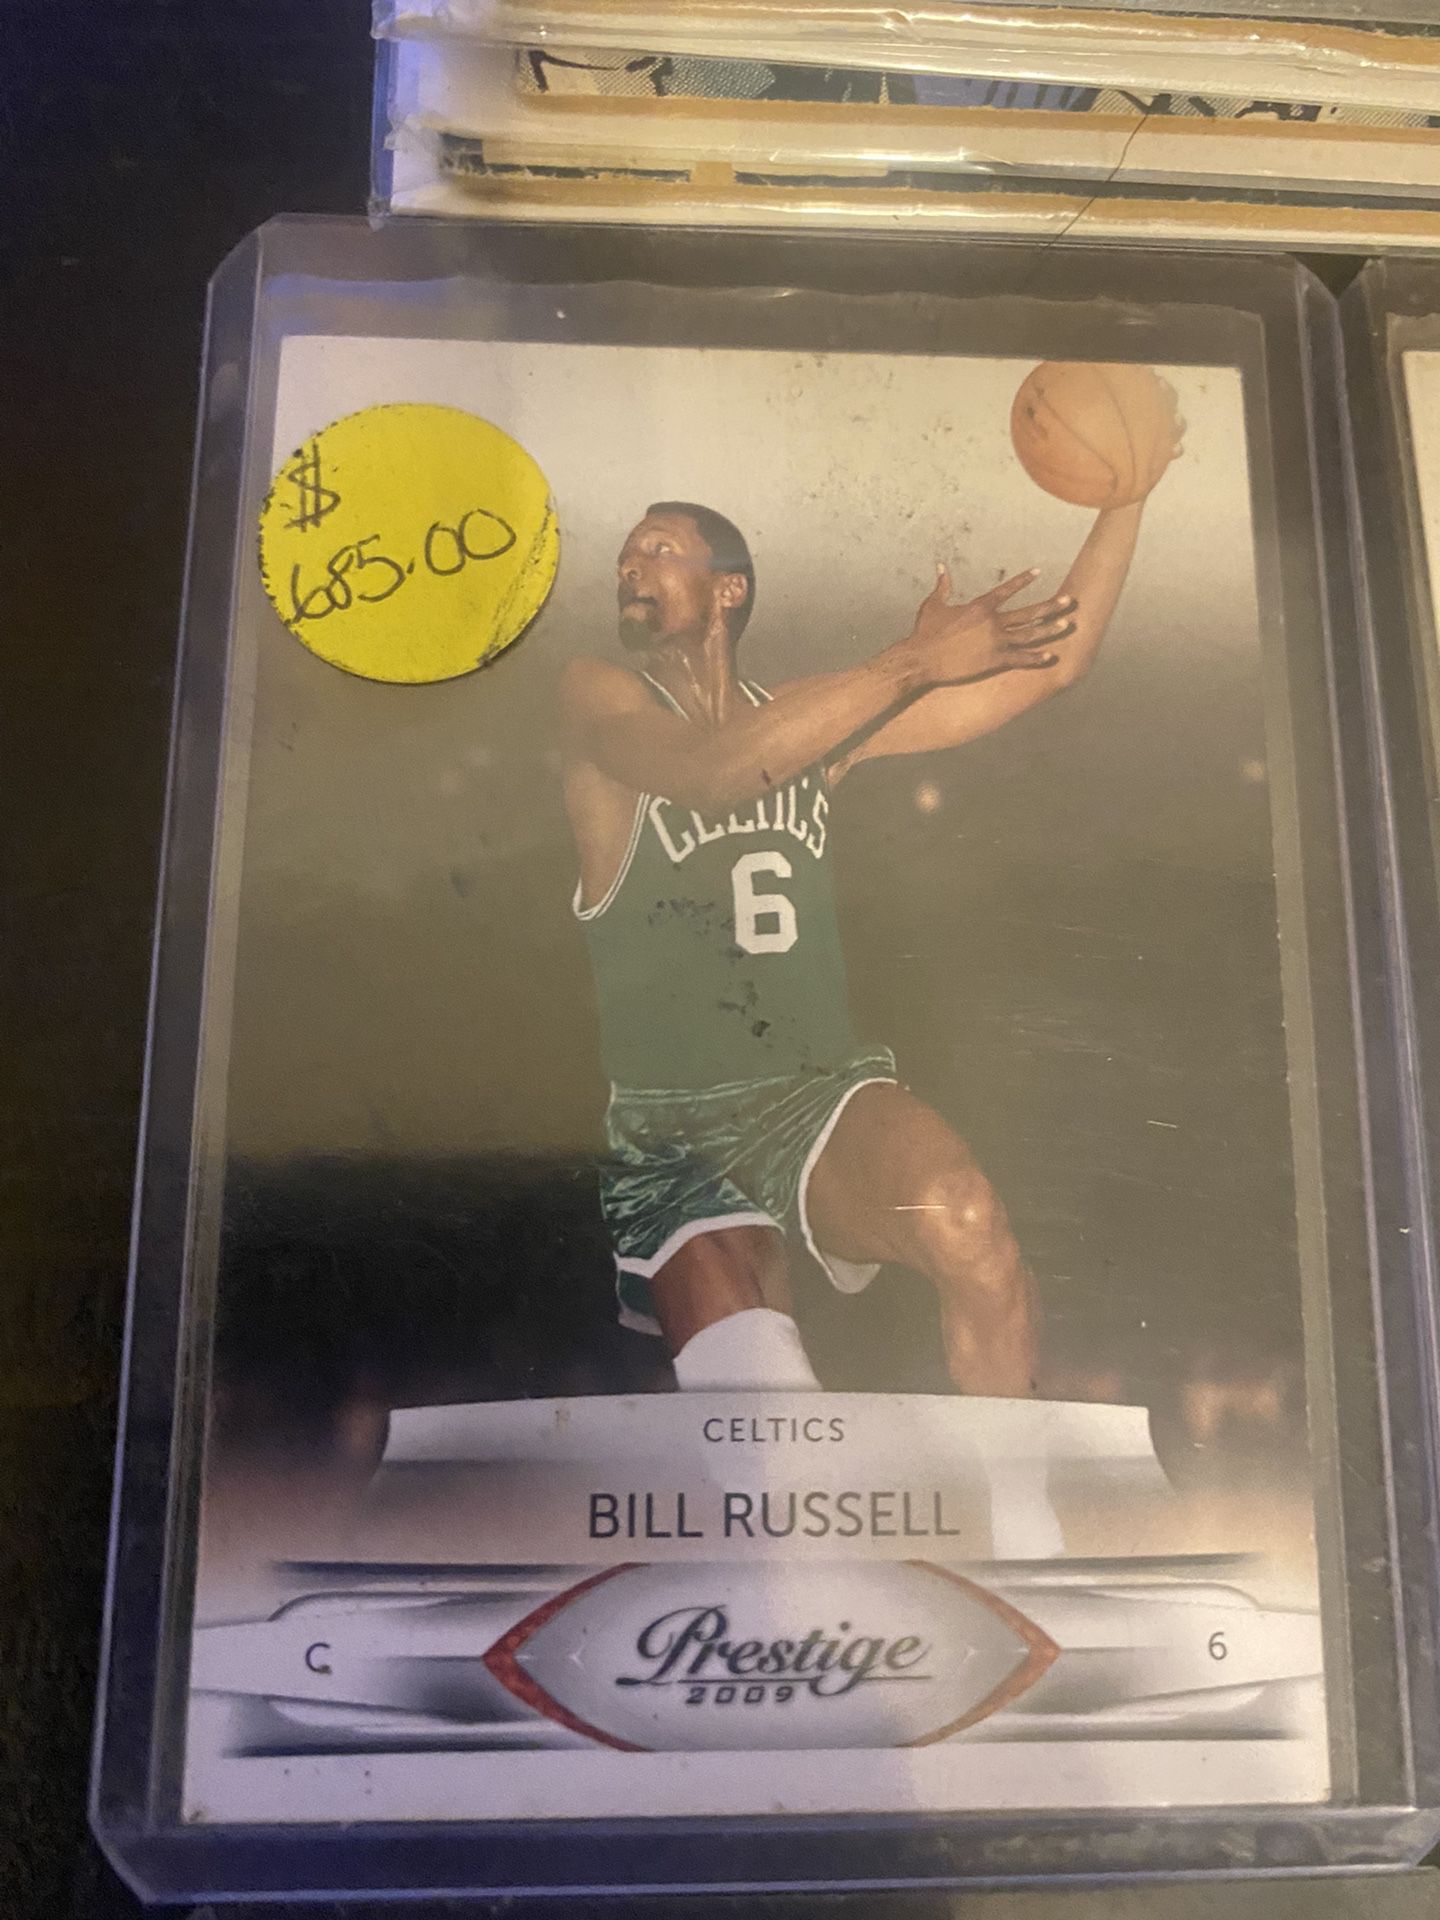 The Bill Russell Card